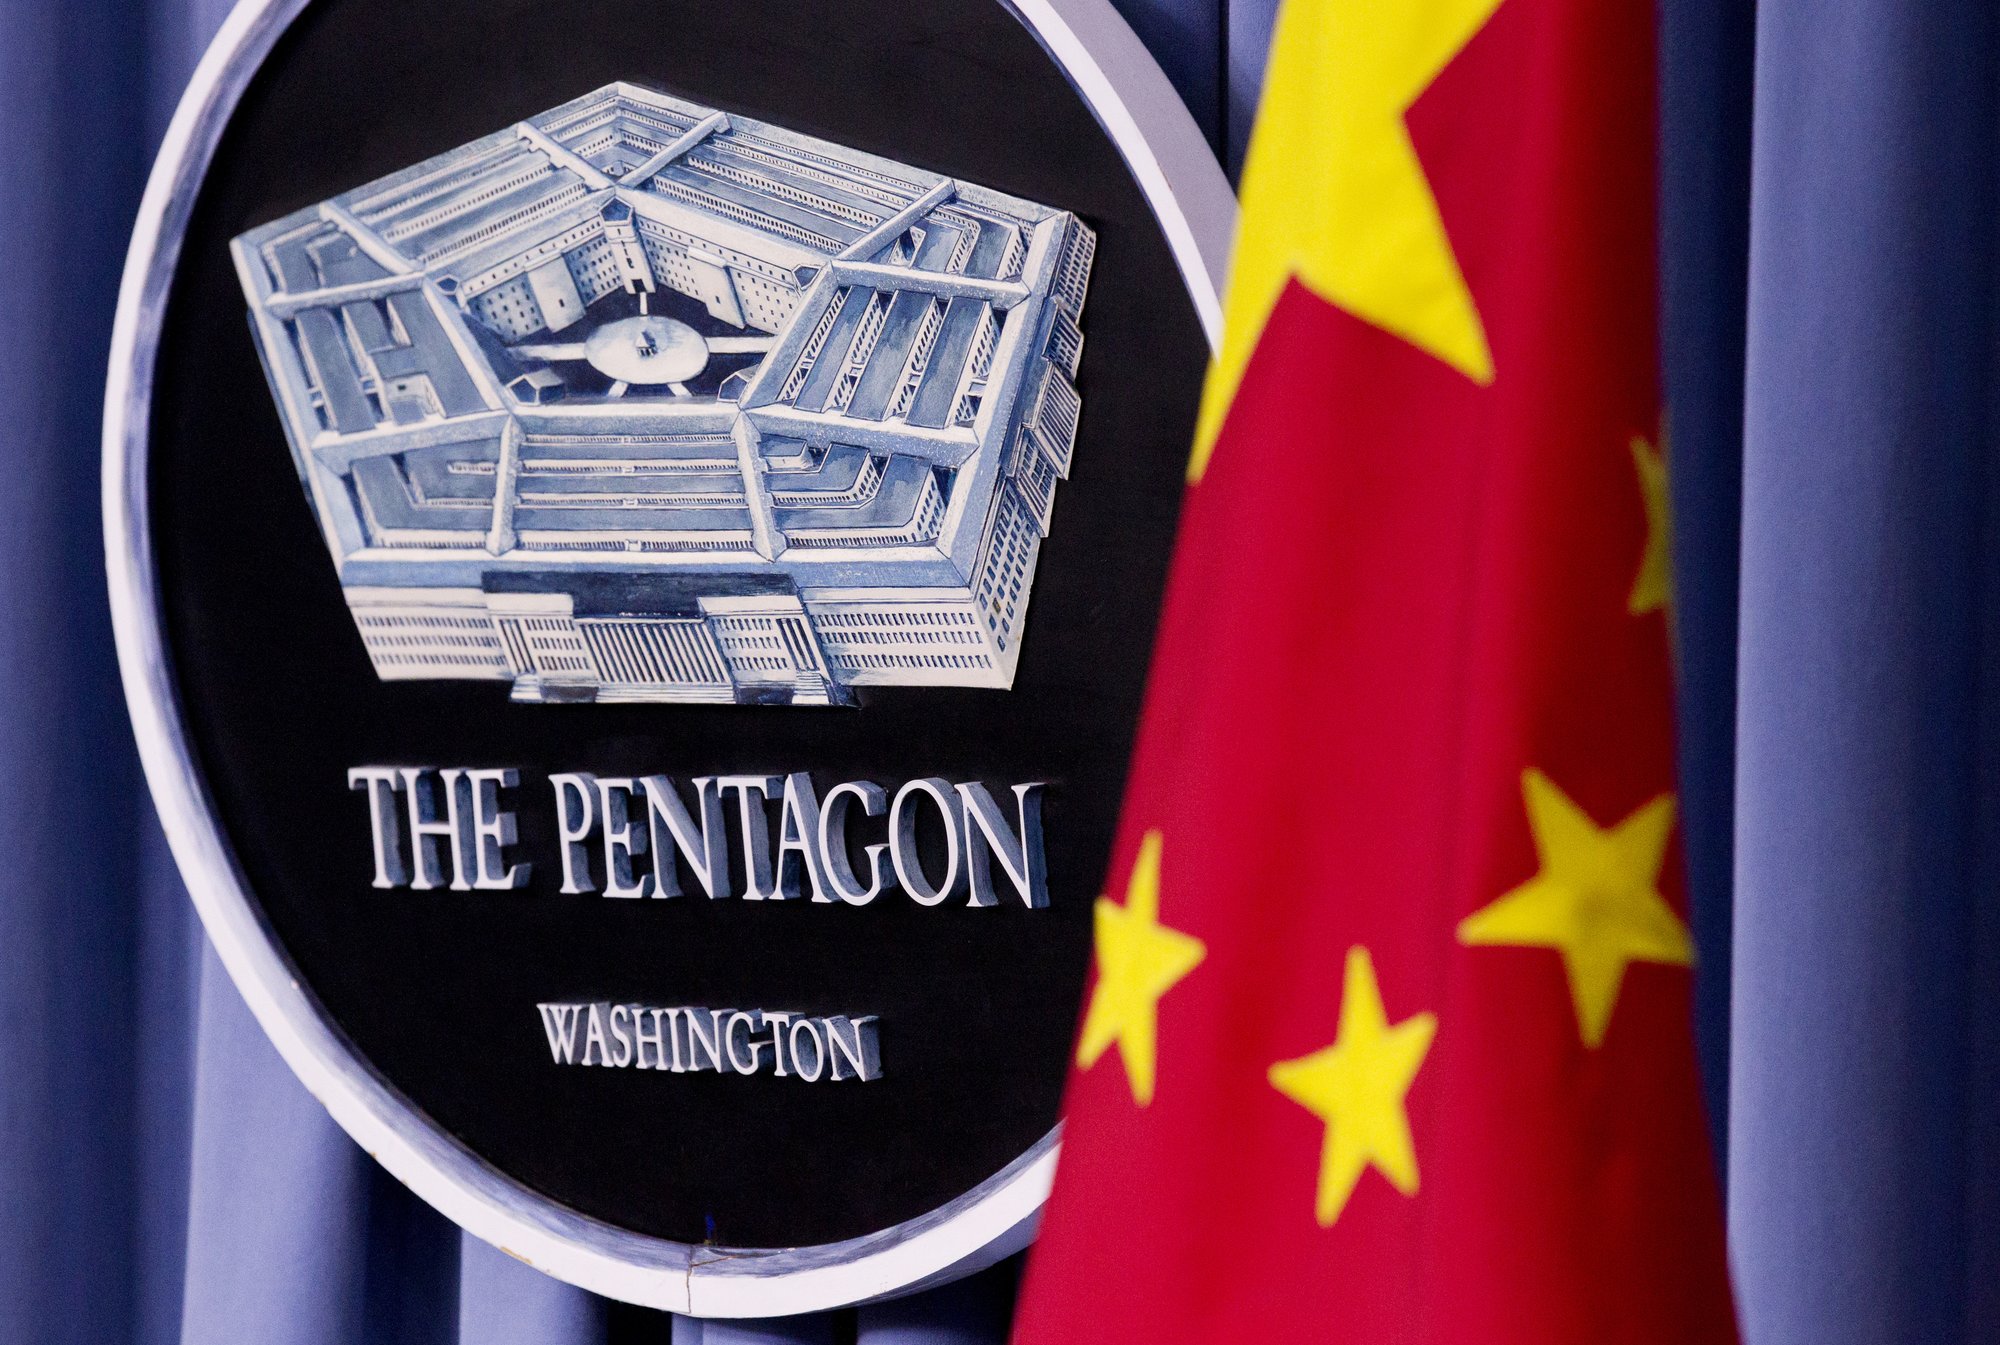 China's national flag is displayed next to the Pentagon logo at the Pentagon, Monday, May 7, 2012. The Pentagon will load up on advanced missiles, space defense and modern jets in its largest defense request in decades in order to meet the threat it perceives from China. The Defense Department's chief financial officer says the spending path will have the military's annual budget cross the $1 trillion threshold in just a matter of years. AP Photo by Manuel Balce Ceneta, File.